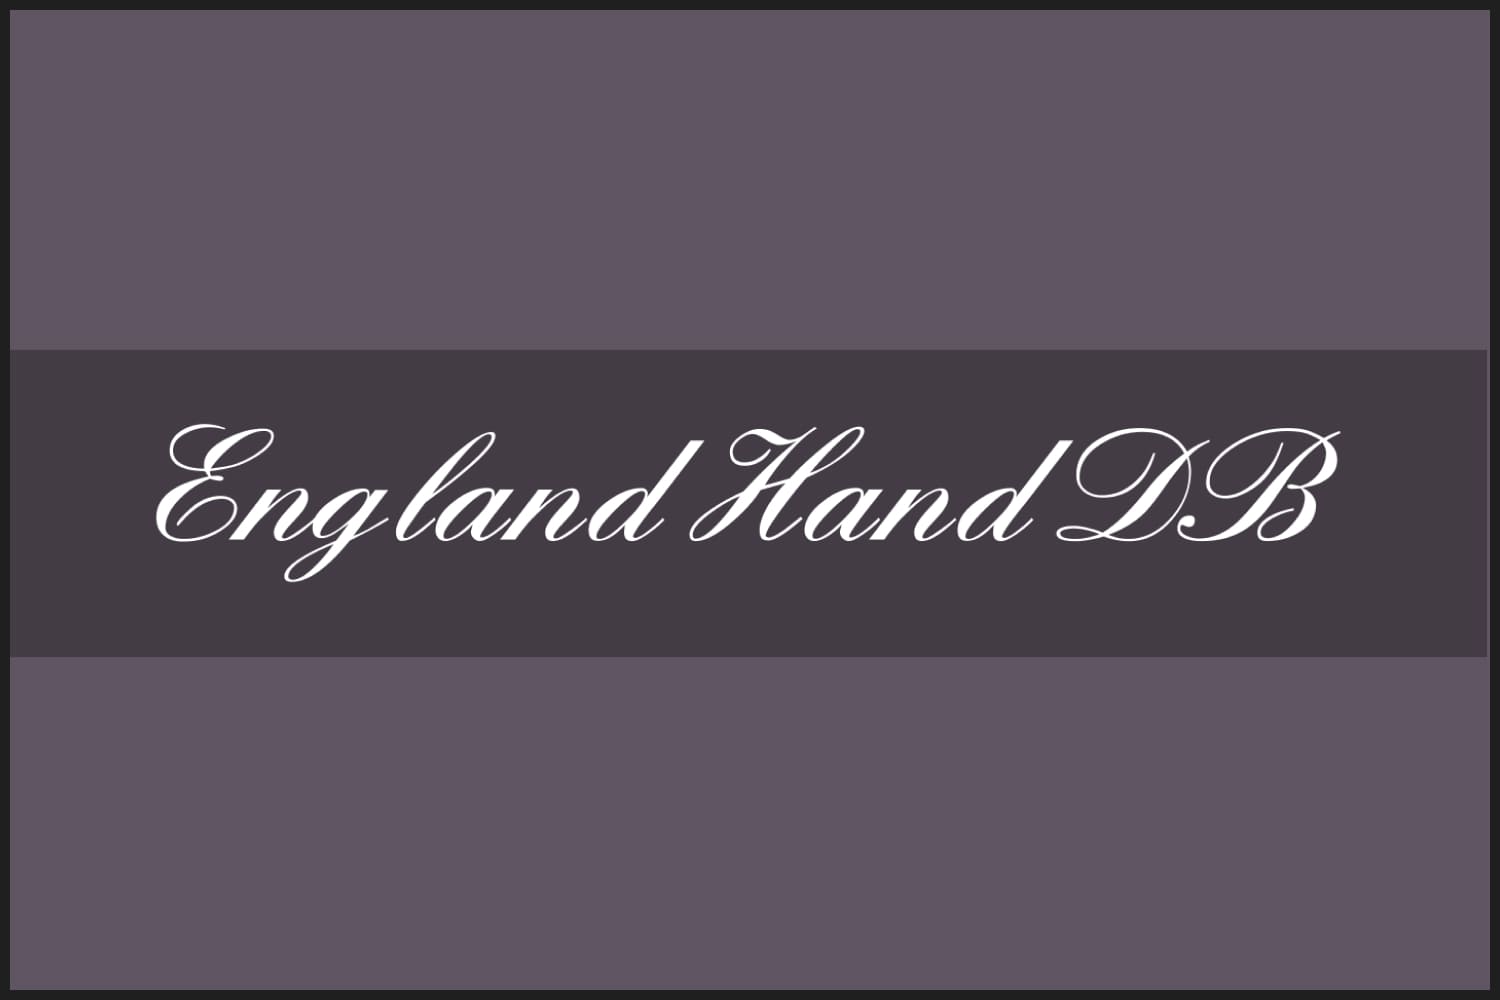 White handwritten text England Hand DB on a gray background.